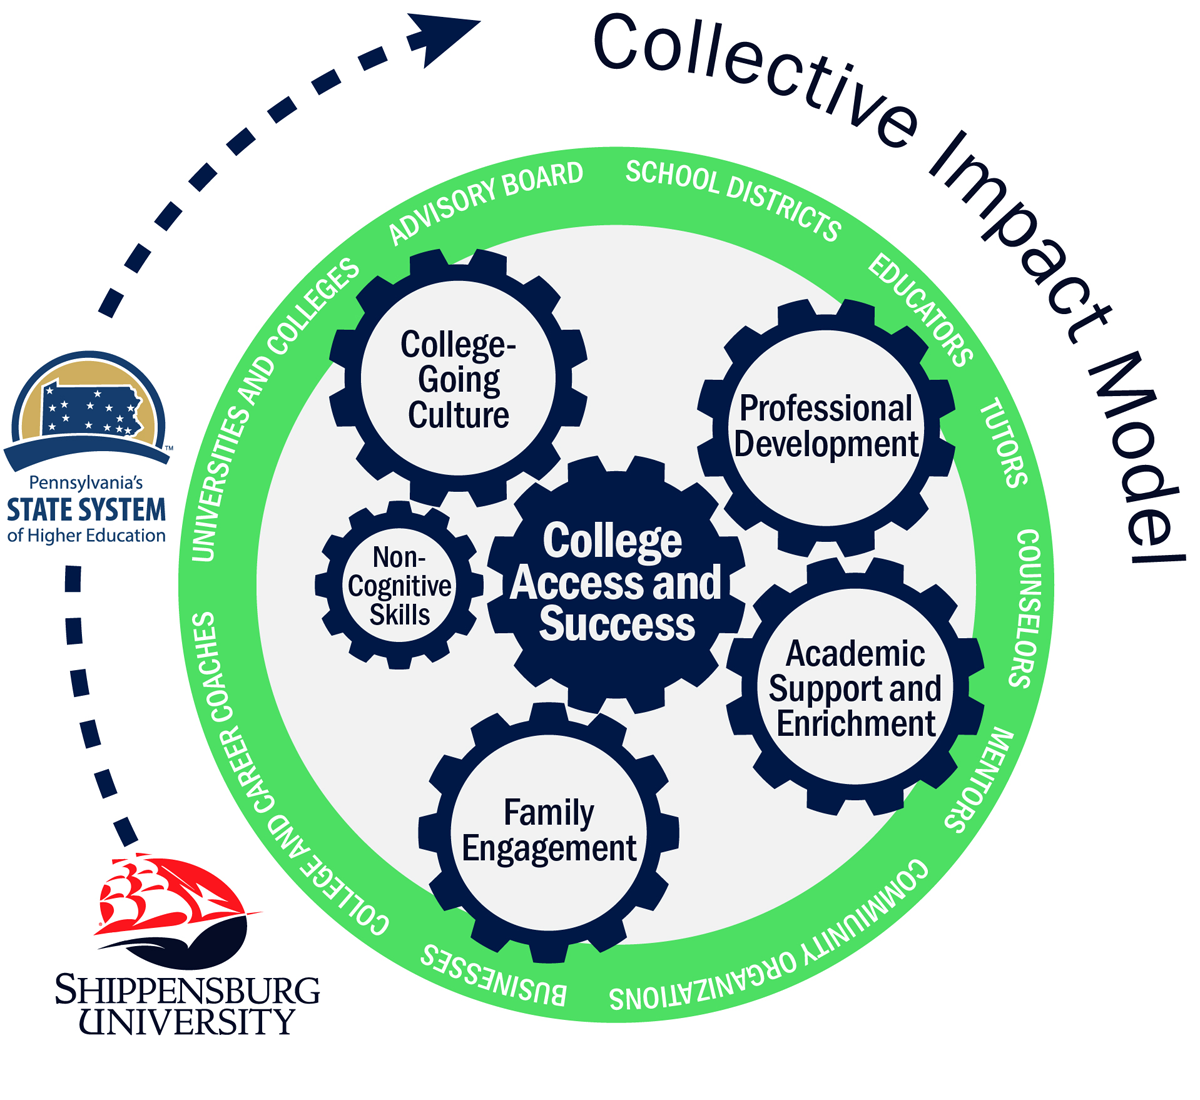 Collective Impact Model